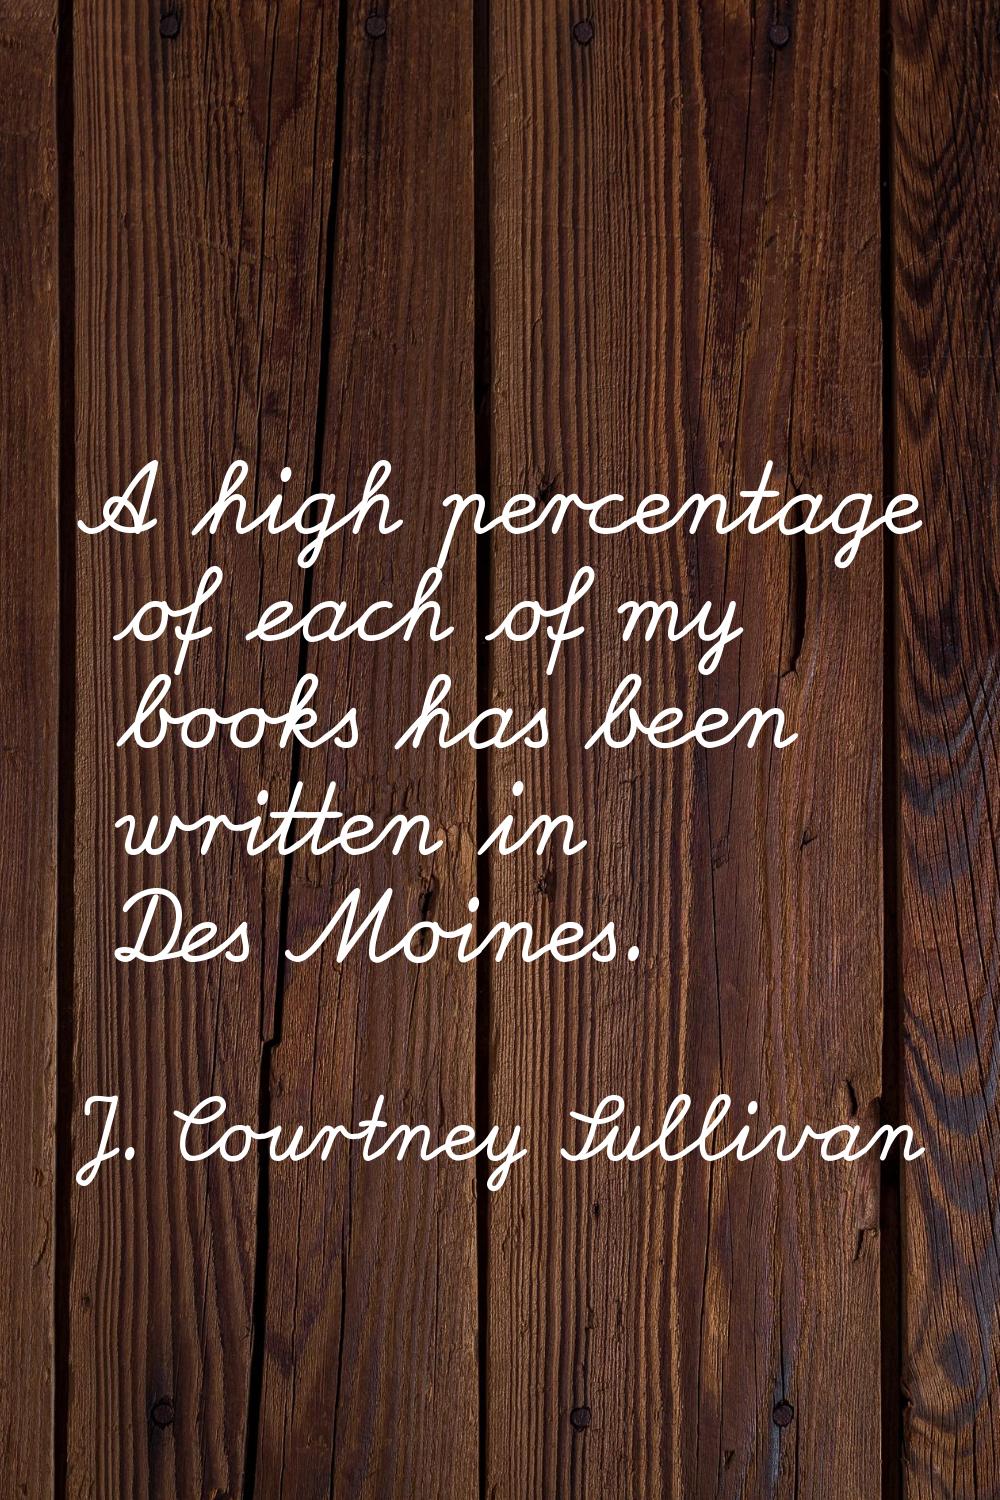 A high percentage of each of my books has been written in Des Moines.